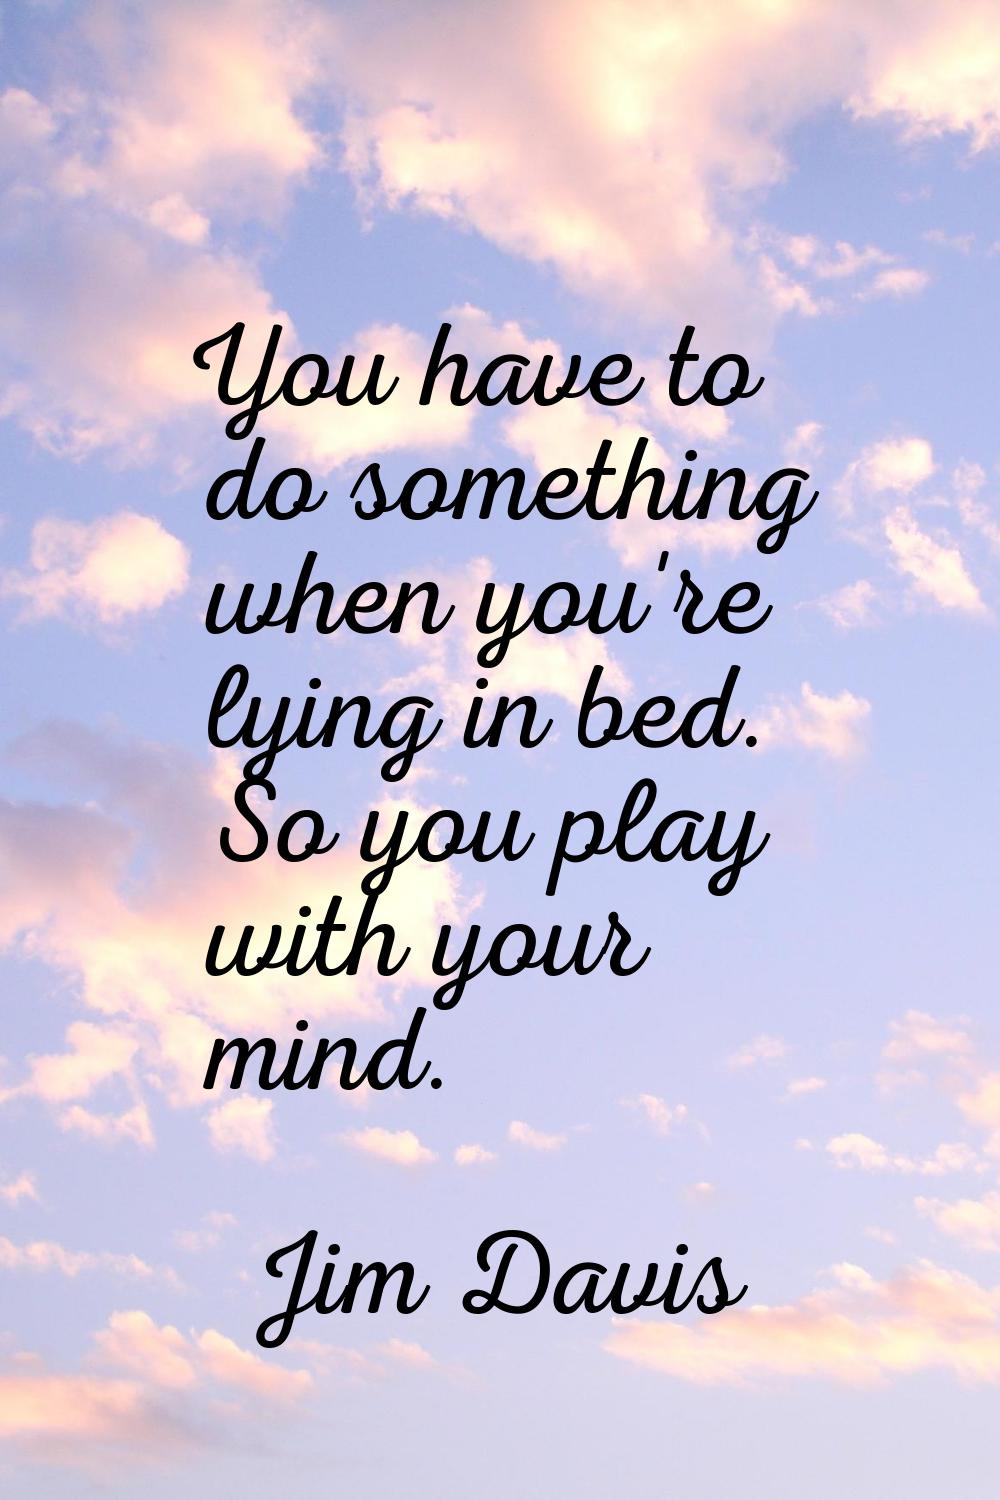 You have to do something when you're lying in bed. So you play with your mind.